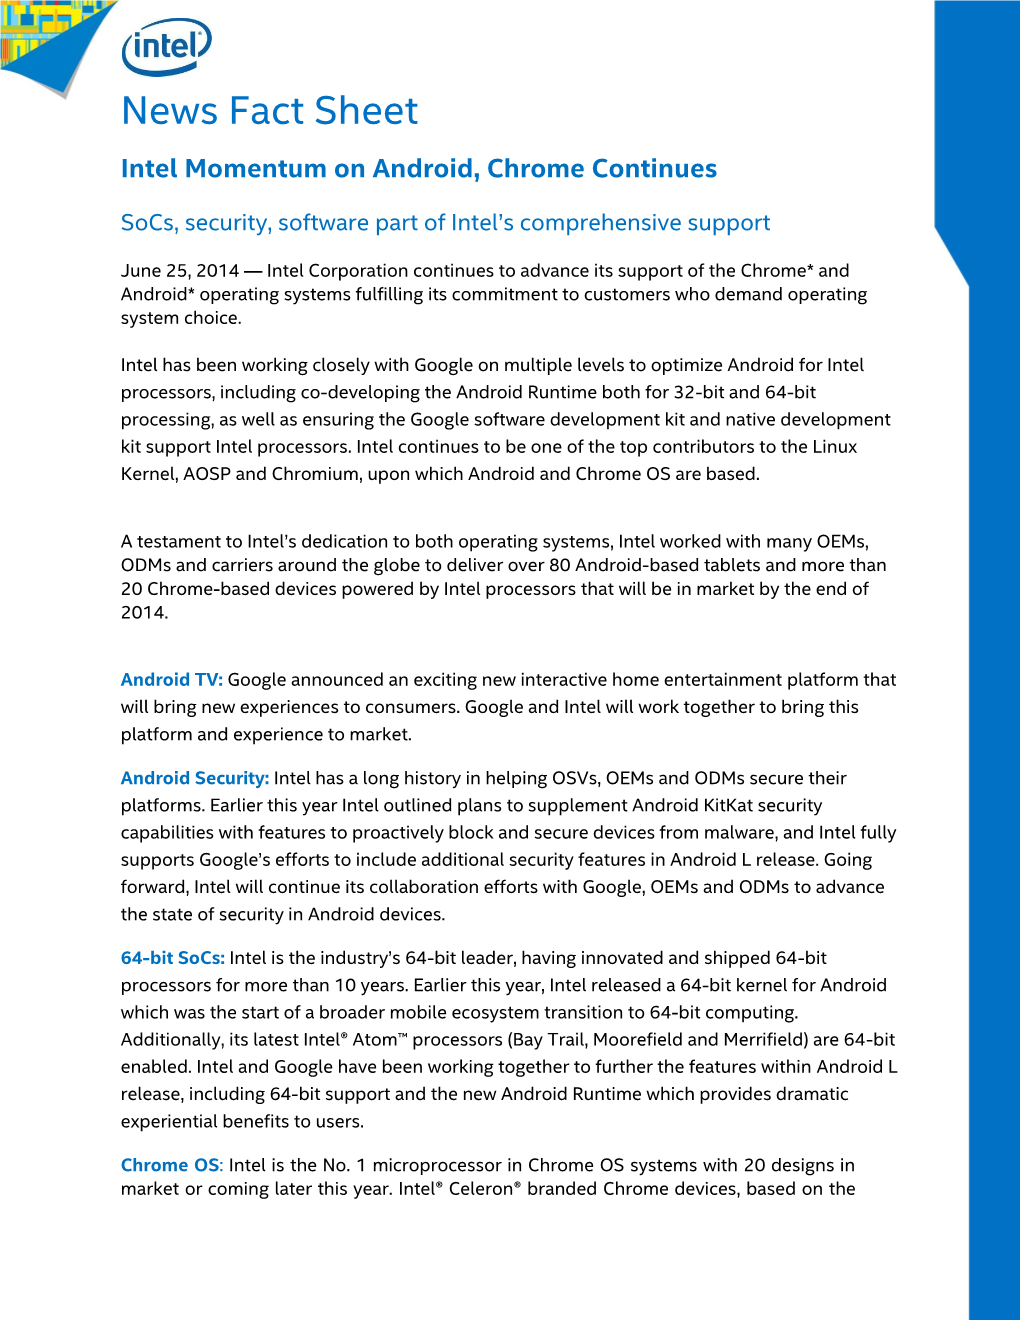 Fact Sheet: Intel Momentum on Android, Chrome Continues